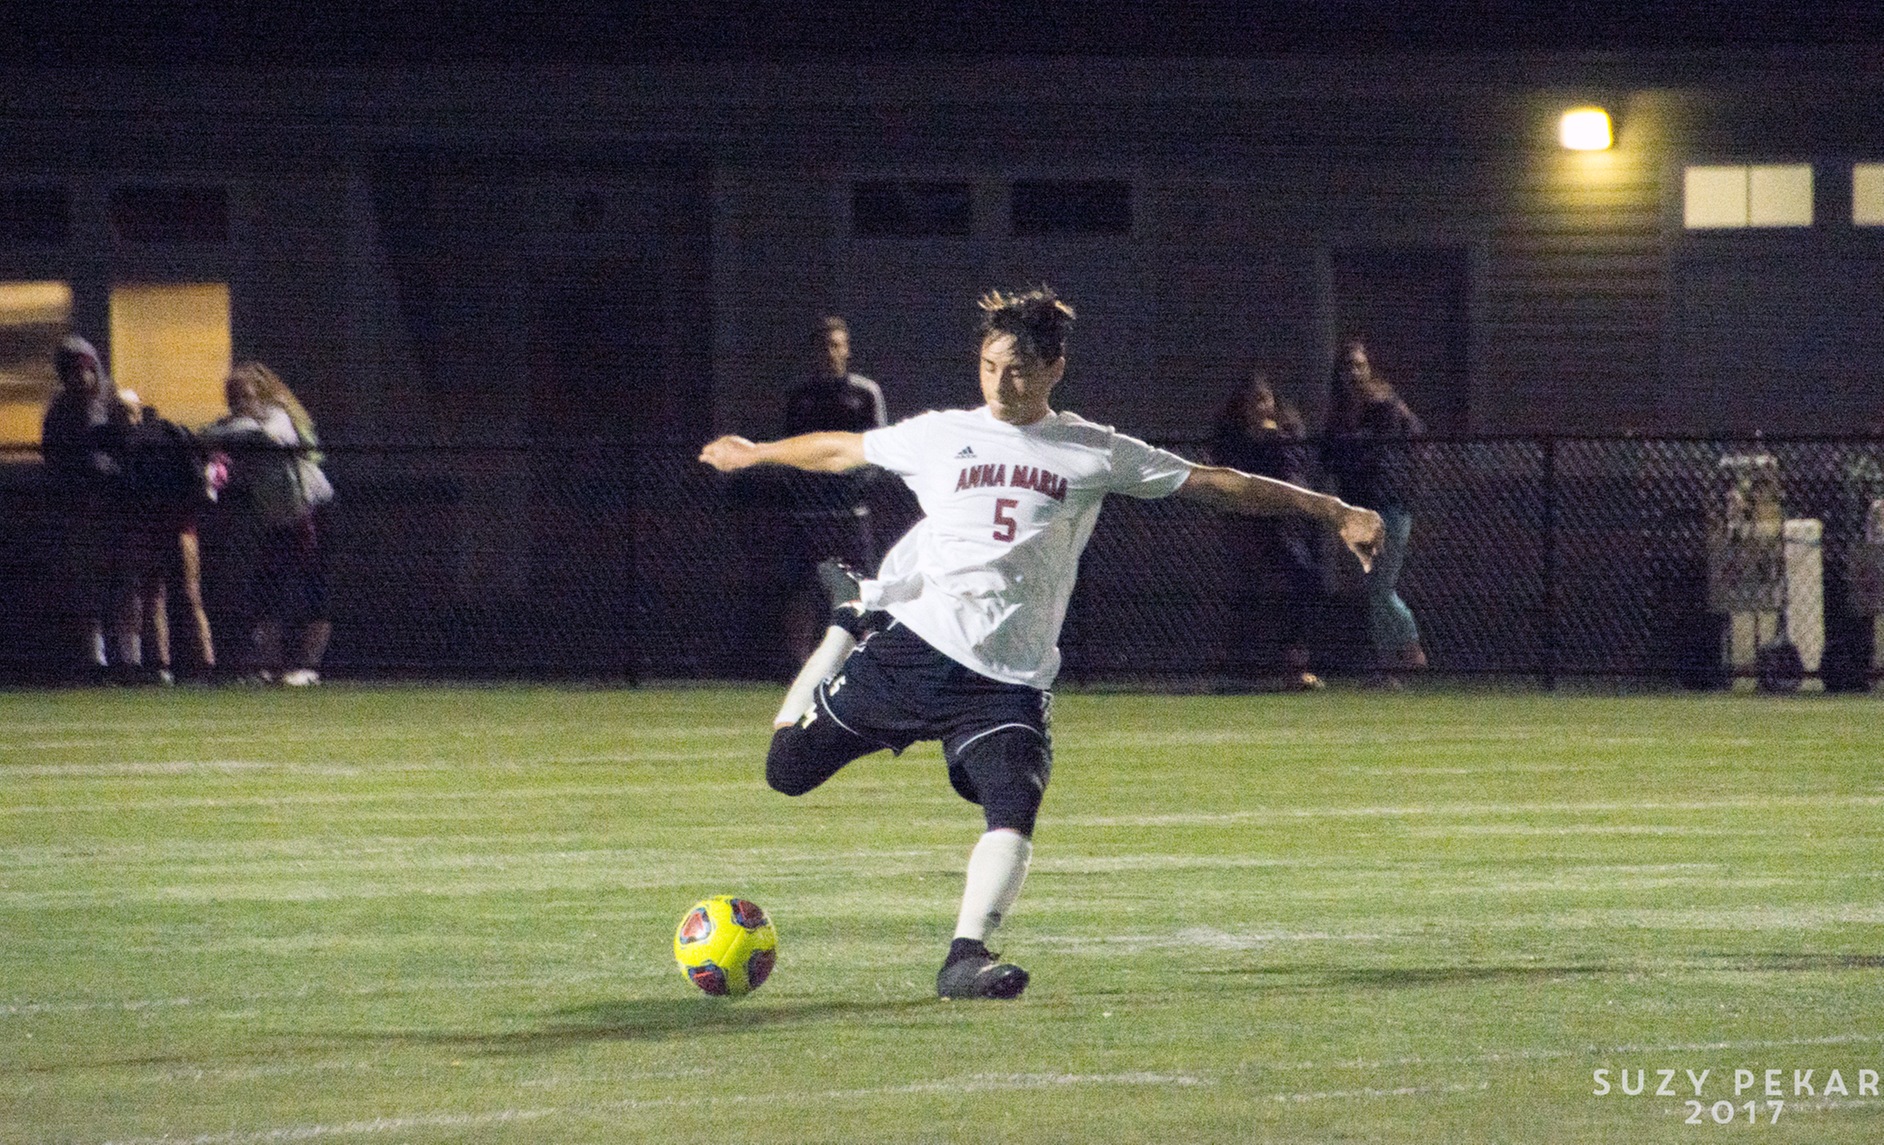 MEN’S SOCCER: Mass. Maritime posts non-conference win over Anna Maria